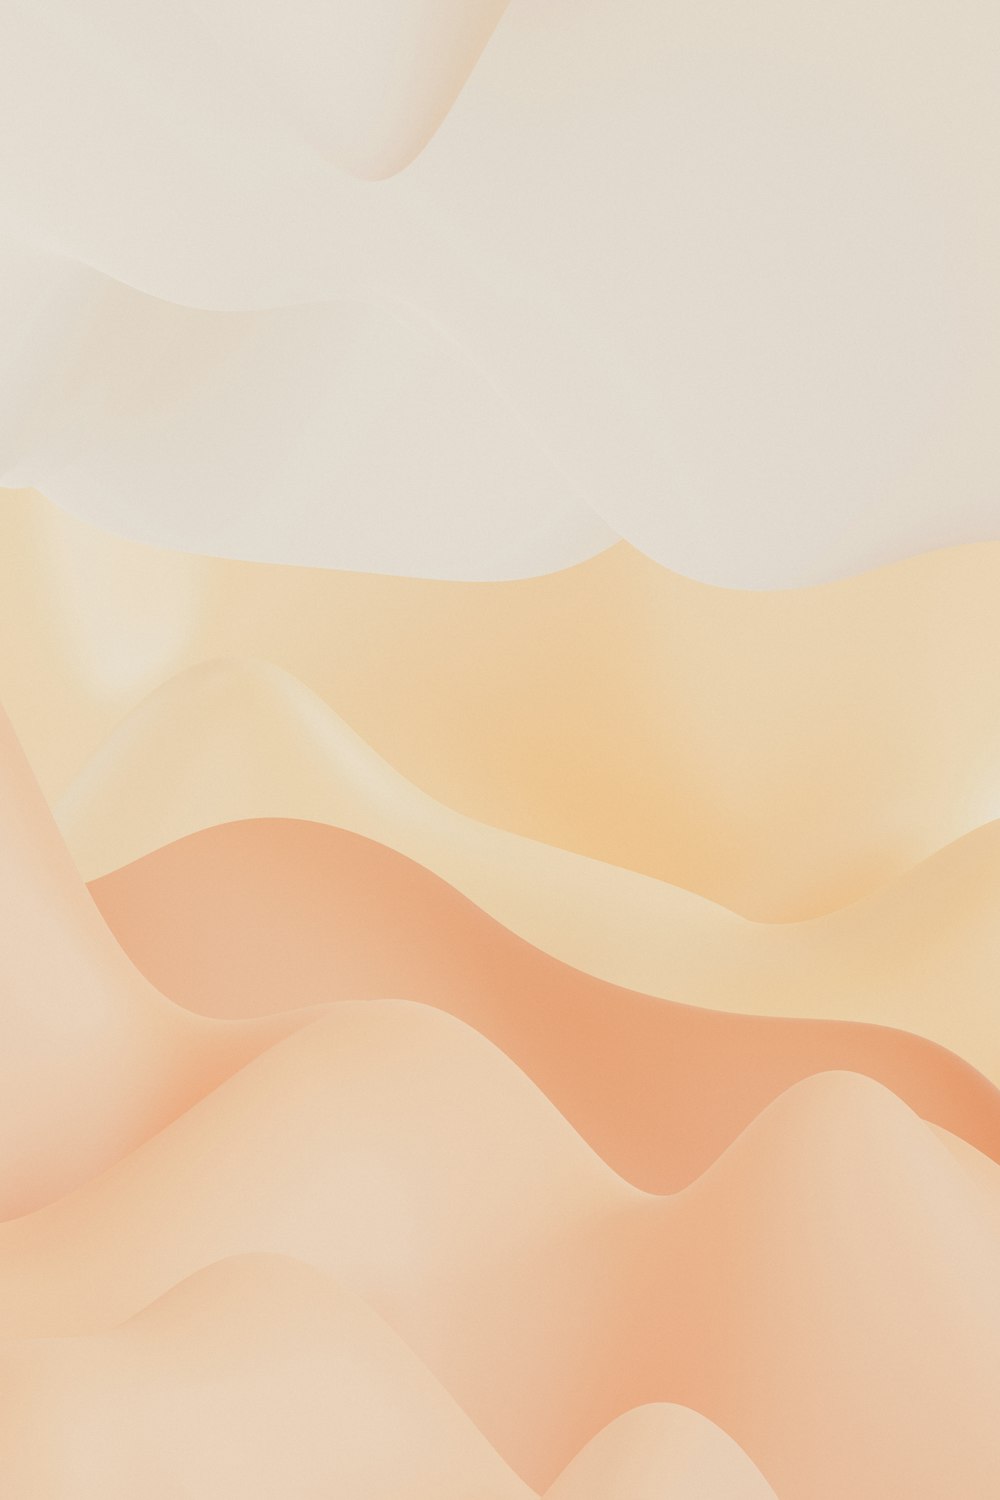 a desert scene with a white and orange background